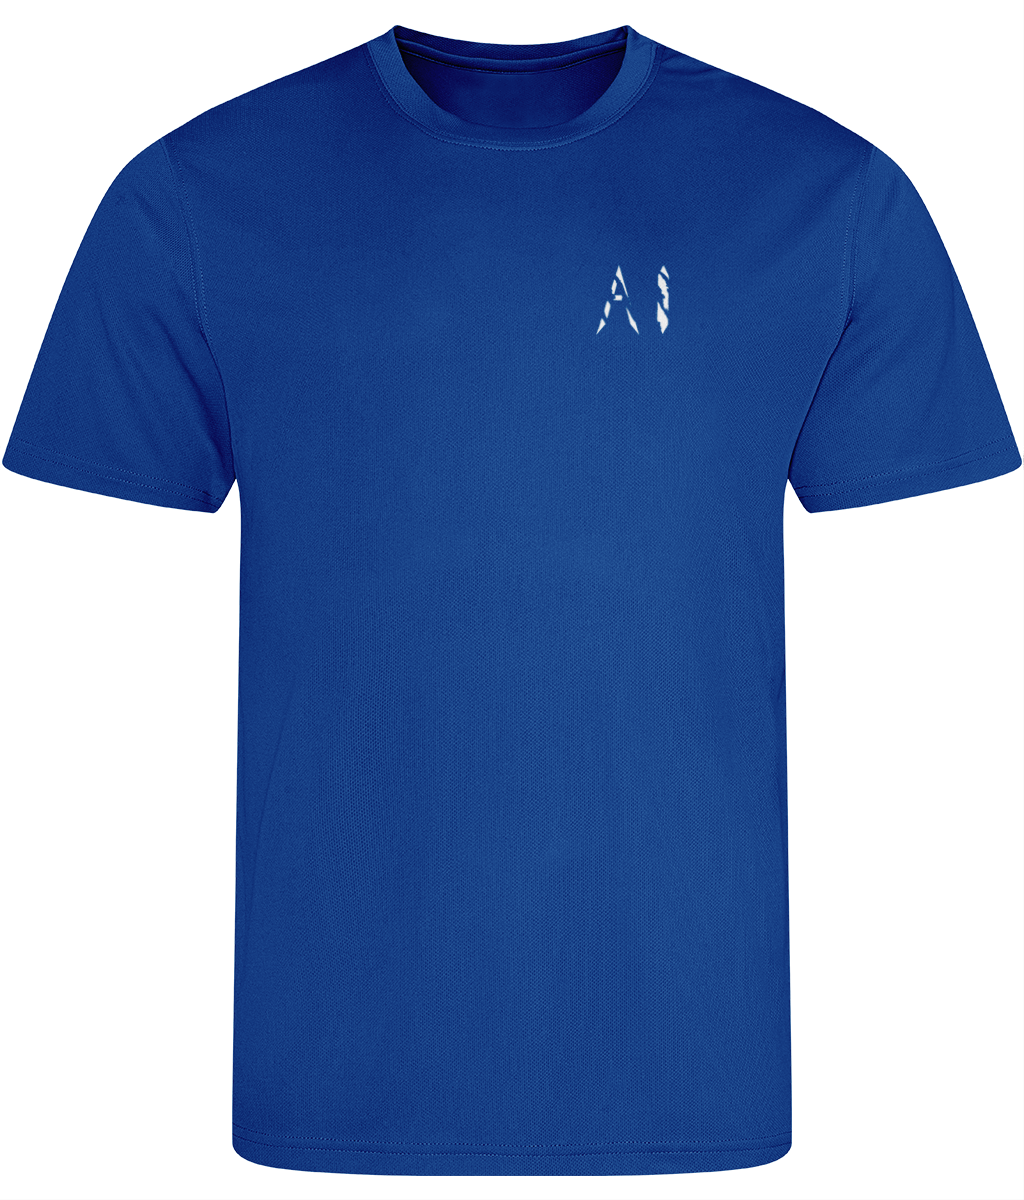 Mens Dark blue Athletic Sports Shirt with white AI logo on the left chest